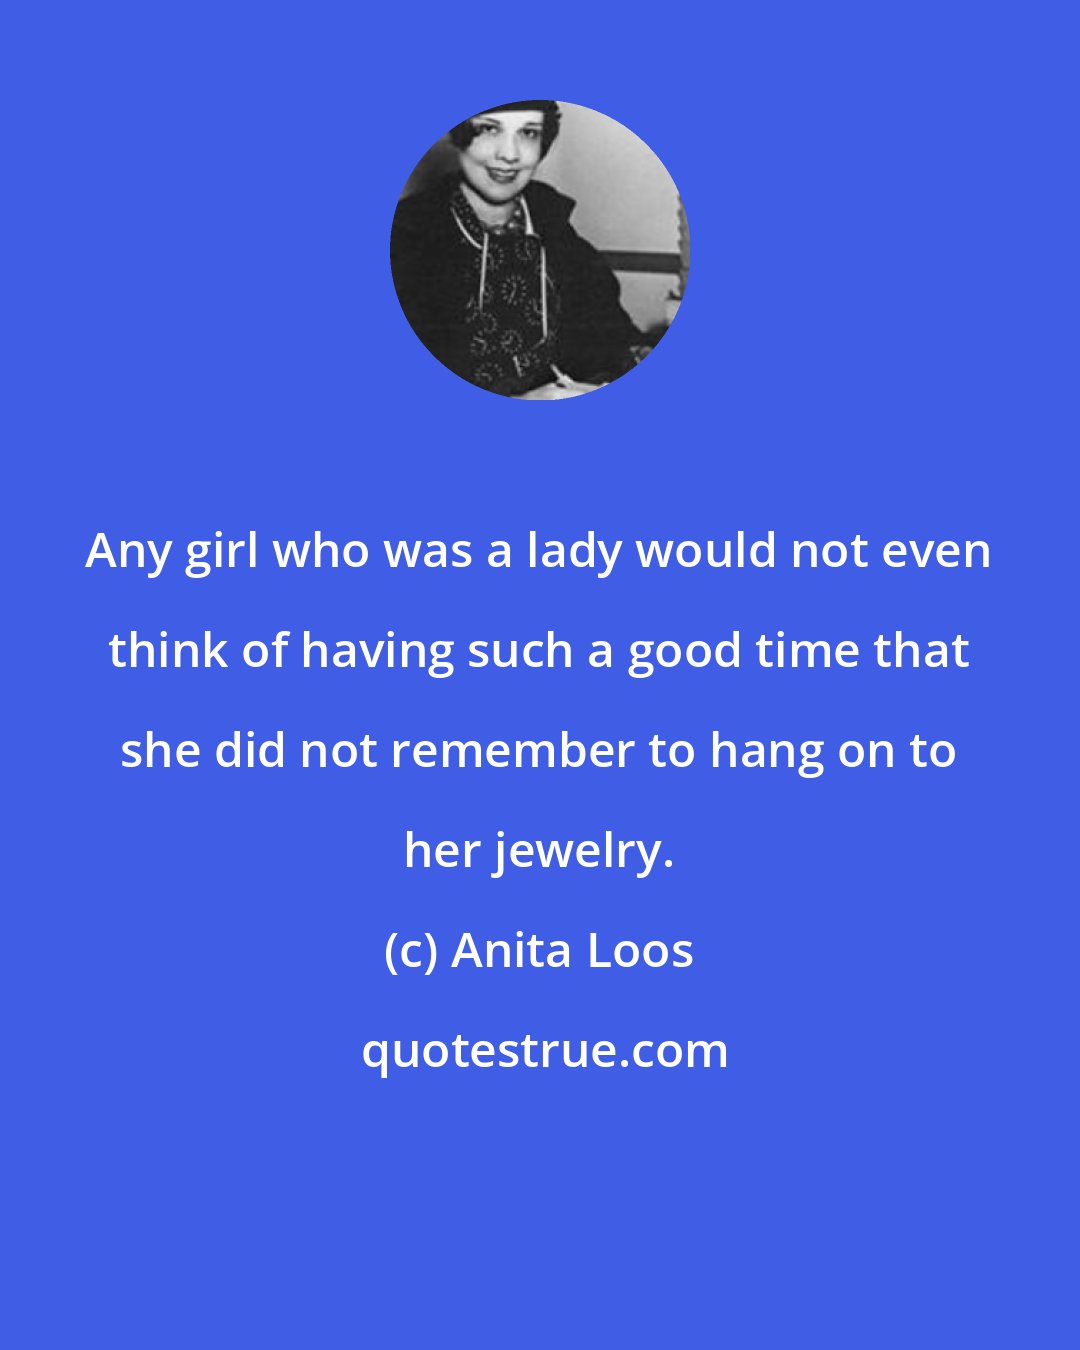 Anita Loos: Any girl who was a lady would not even think of having such a good time that she did not remember to hang on to her jewelry.